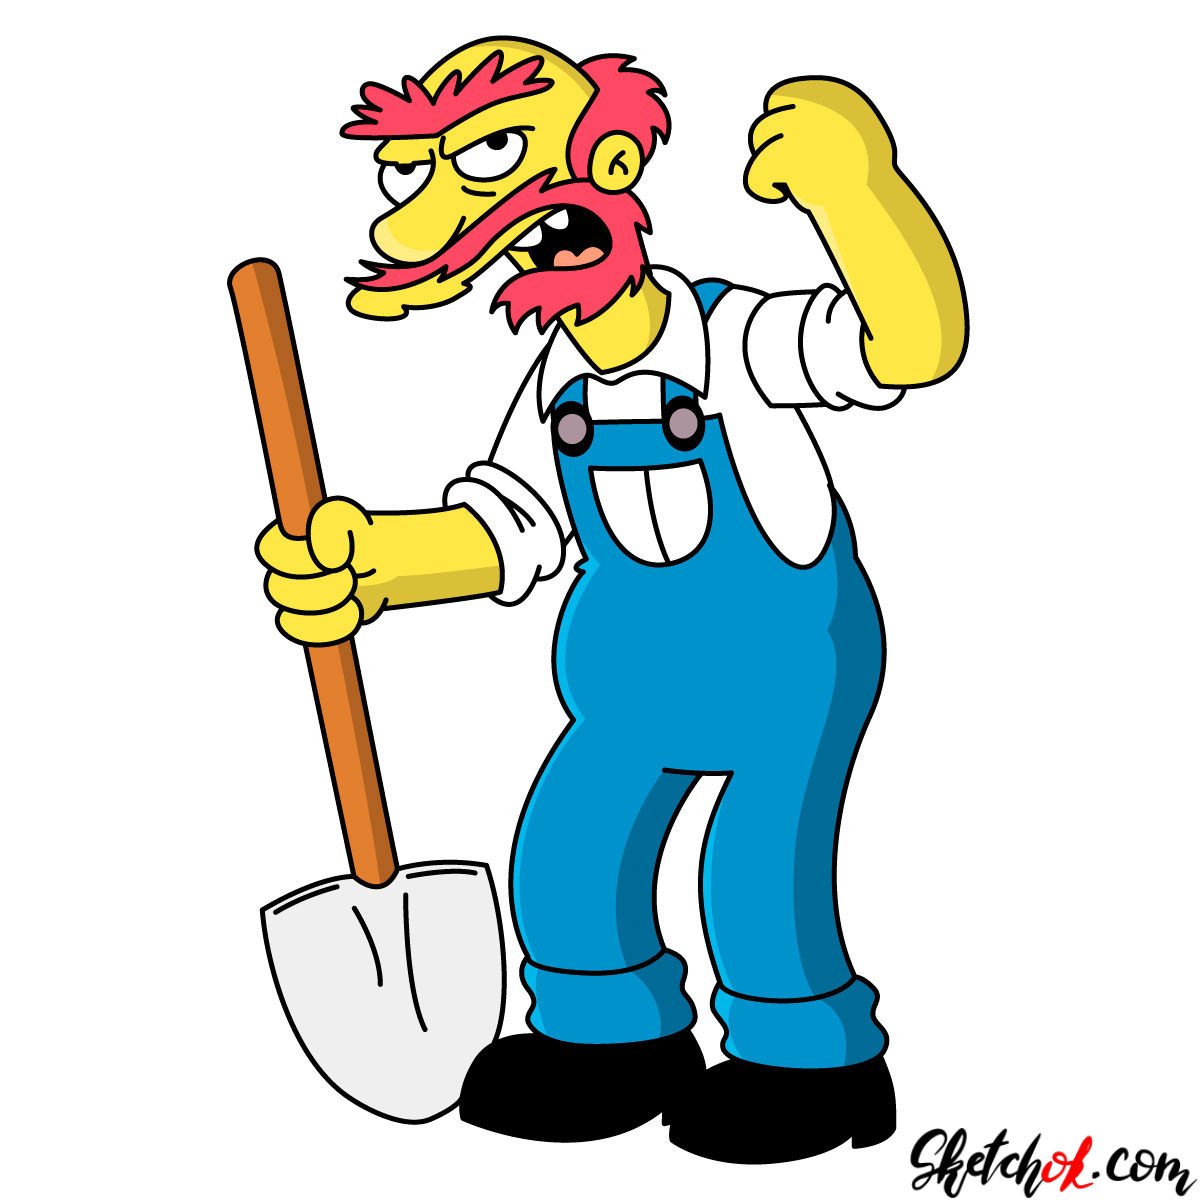 How to draw Groundskeeper Willie with a shovel